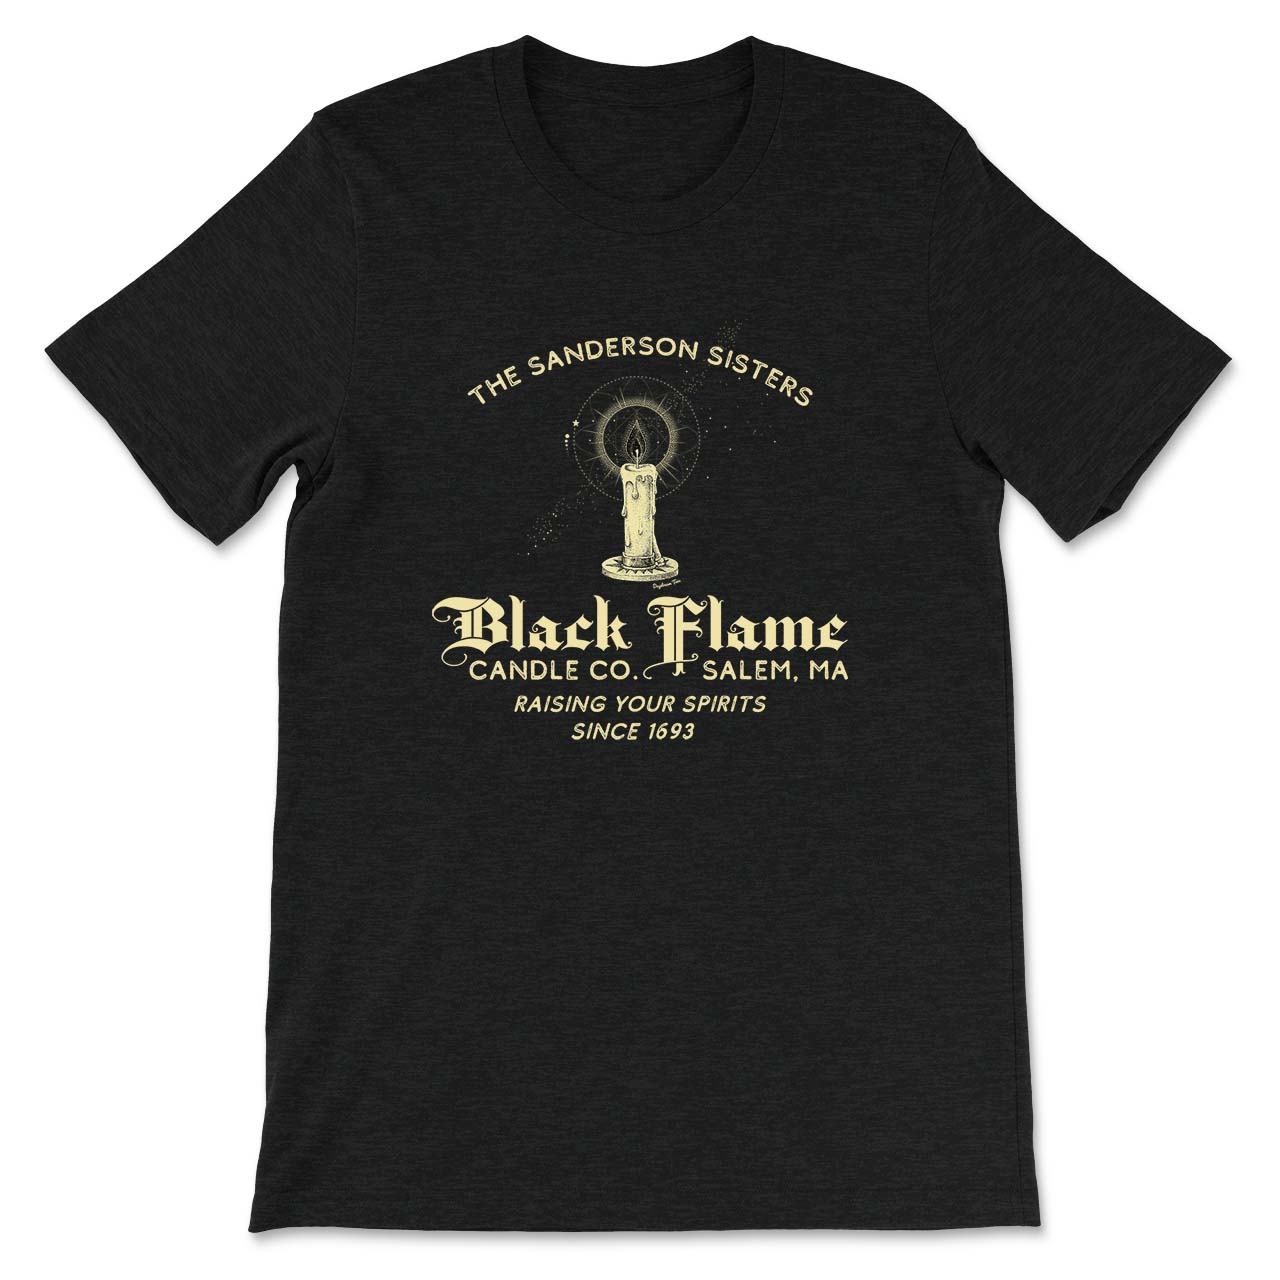 Daydream Tees Black Flame Candle Co.